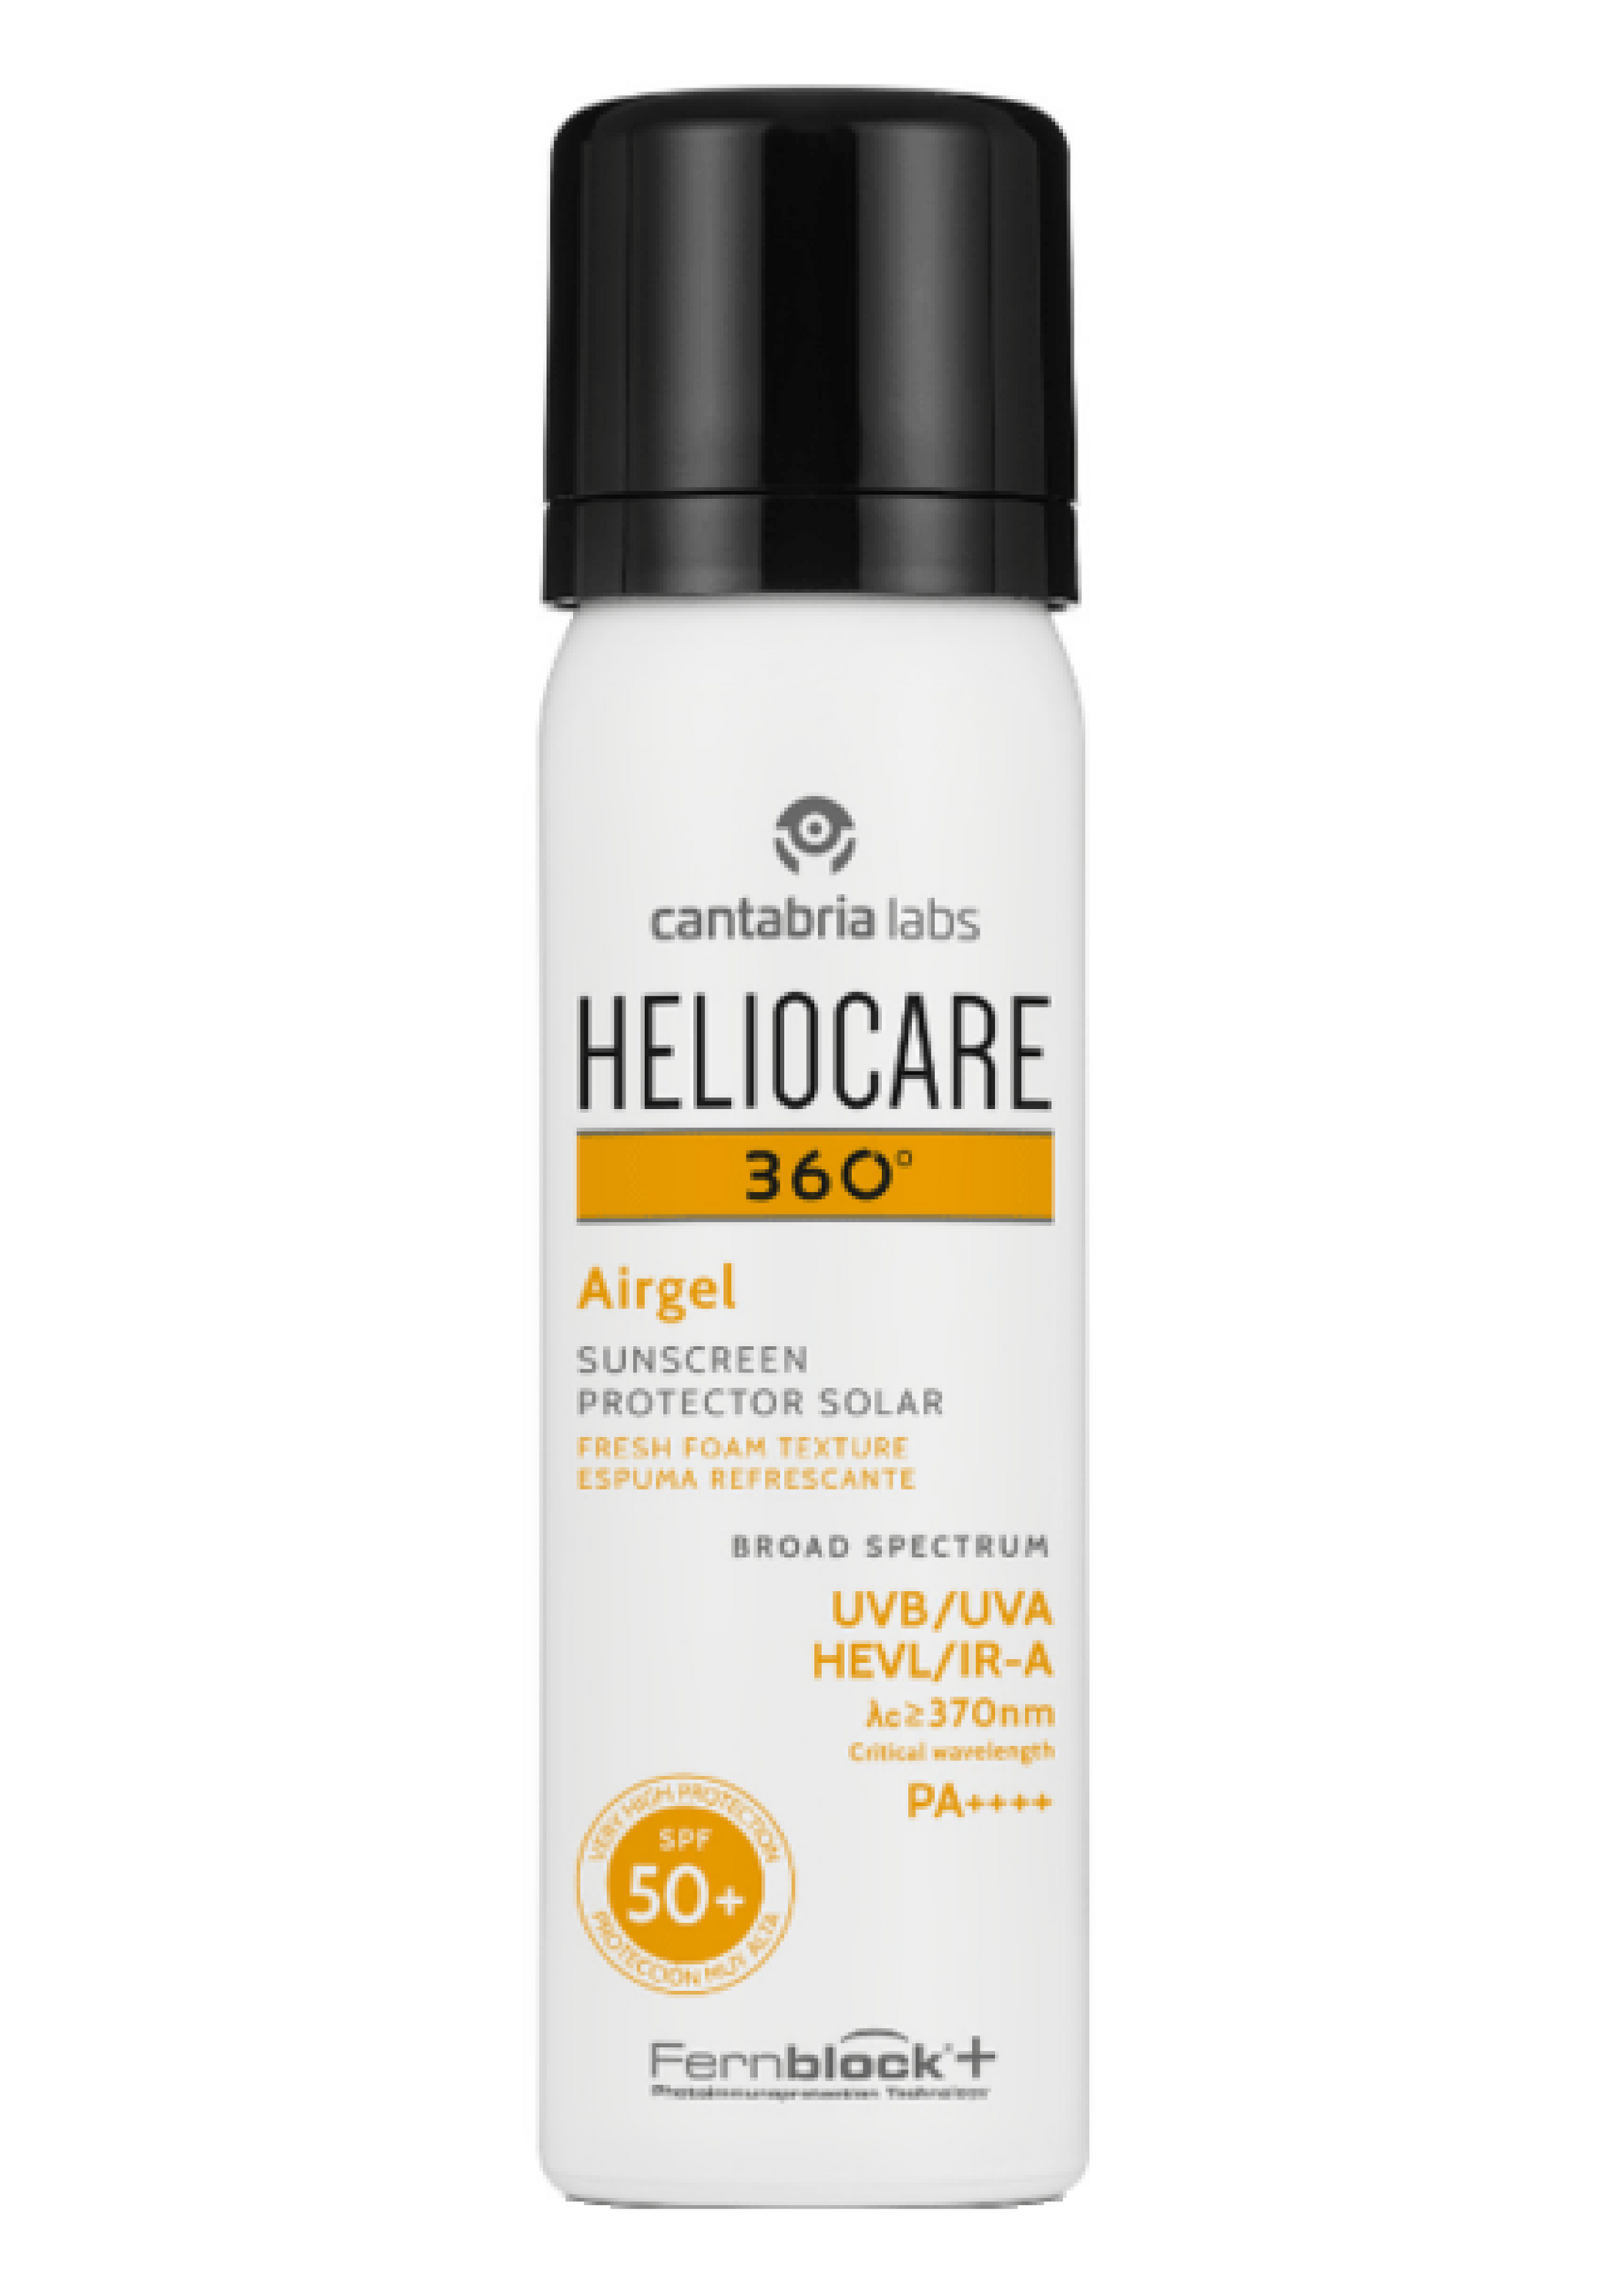 Heliocare® 360° Airgel SPF 50